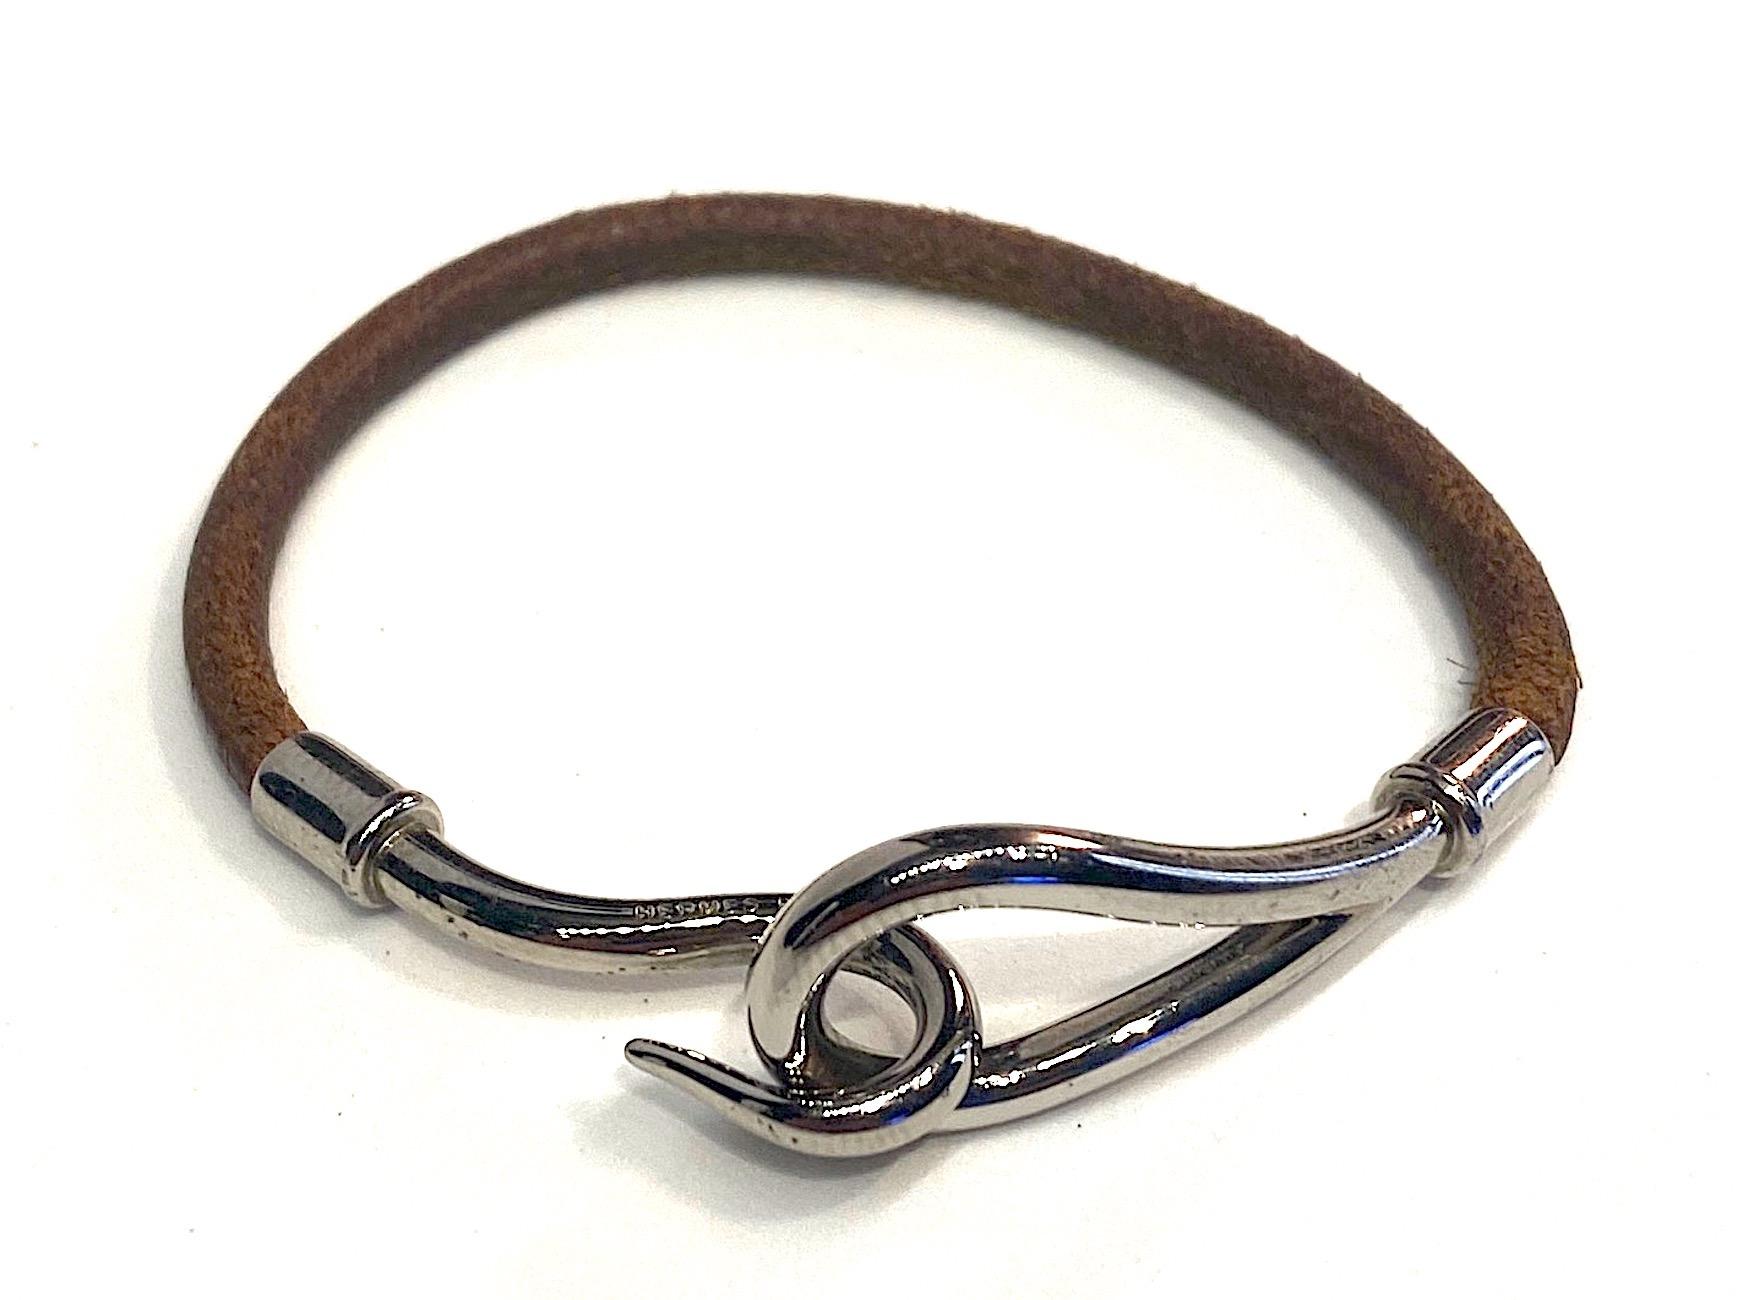 Hermes Jumbo Hook bracelet in cognac color leather cord with Palladium hardware. The Jumbo hook is inscribed Hermes. End to end the necklace measures 7.13 inches long. The eye end of the necklace is .69 on an inch wide. Very nice condition.